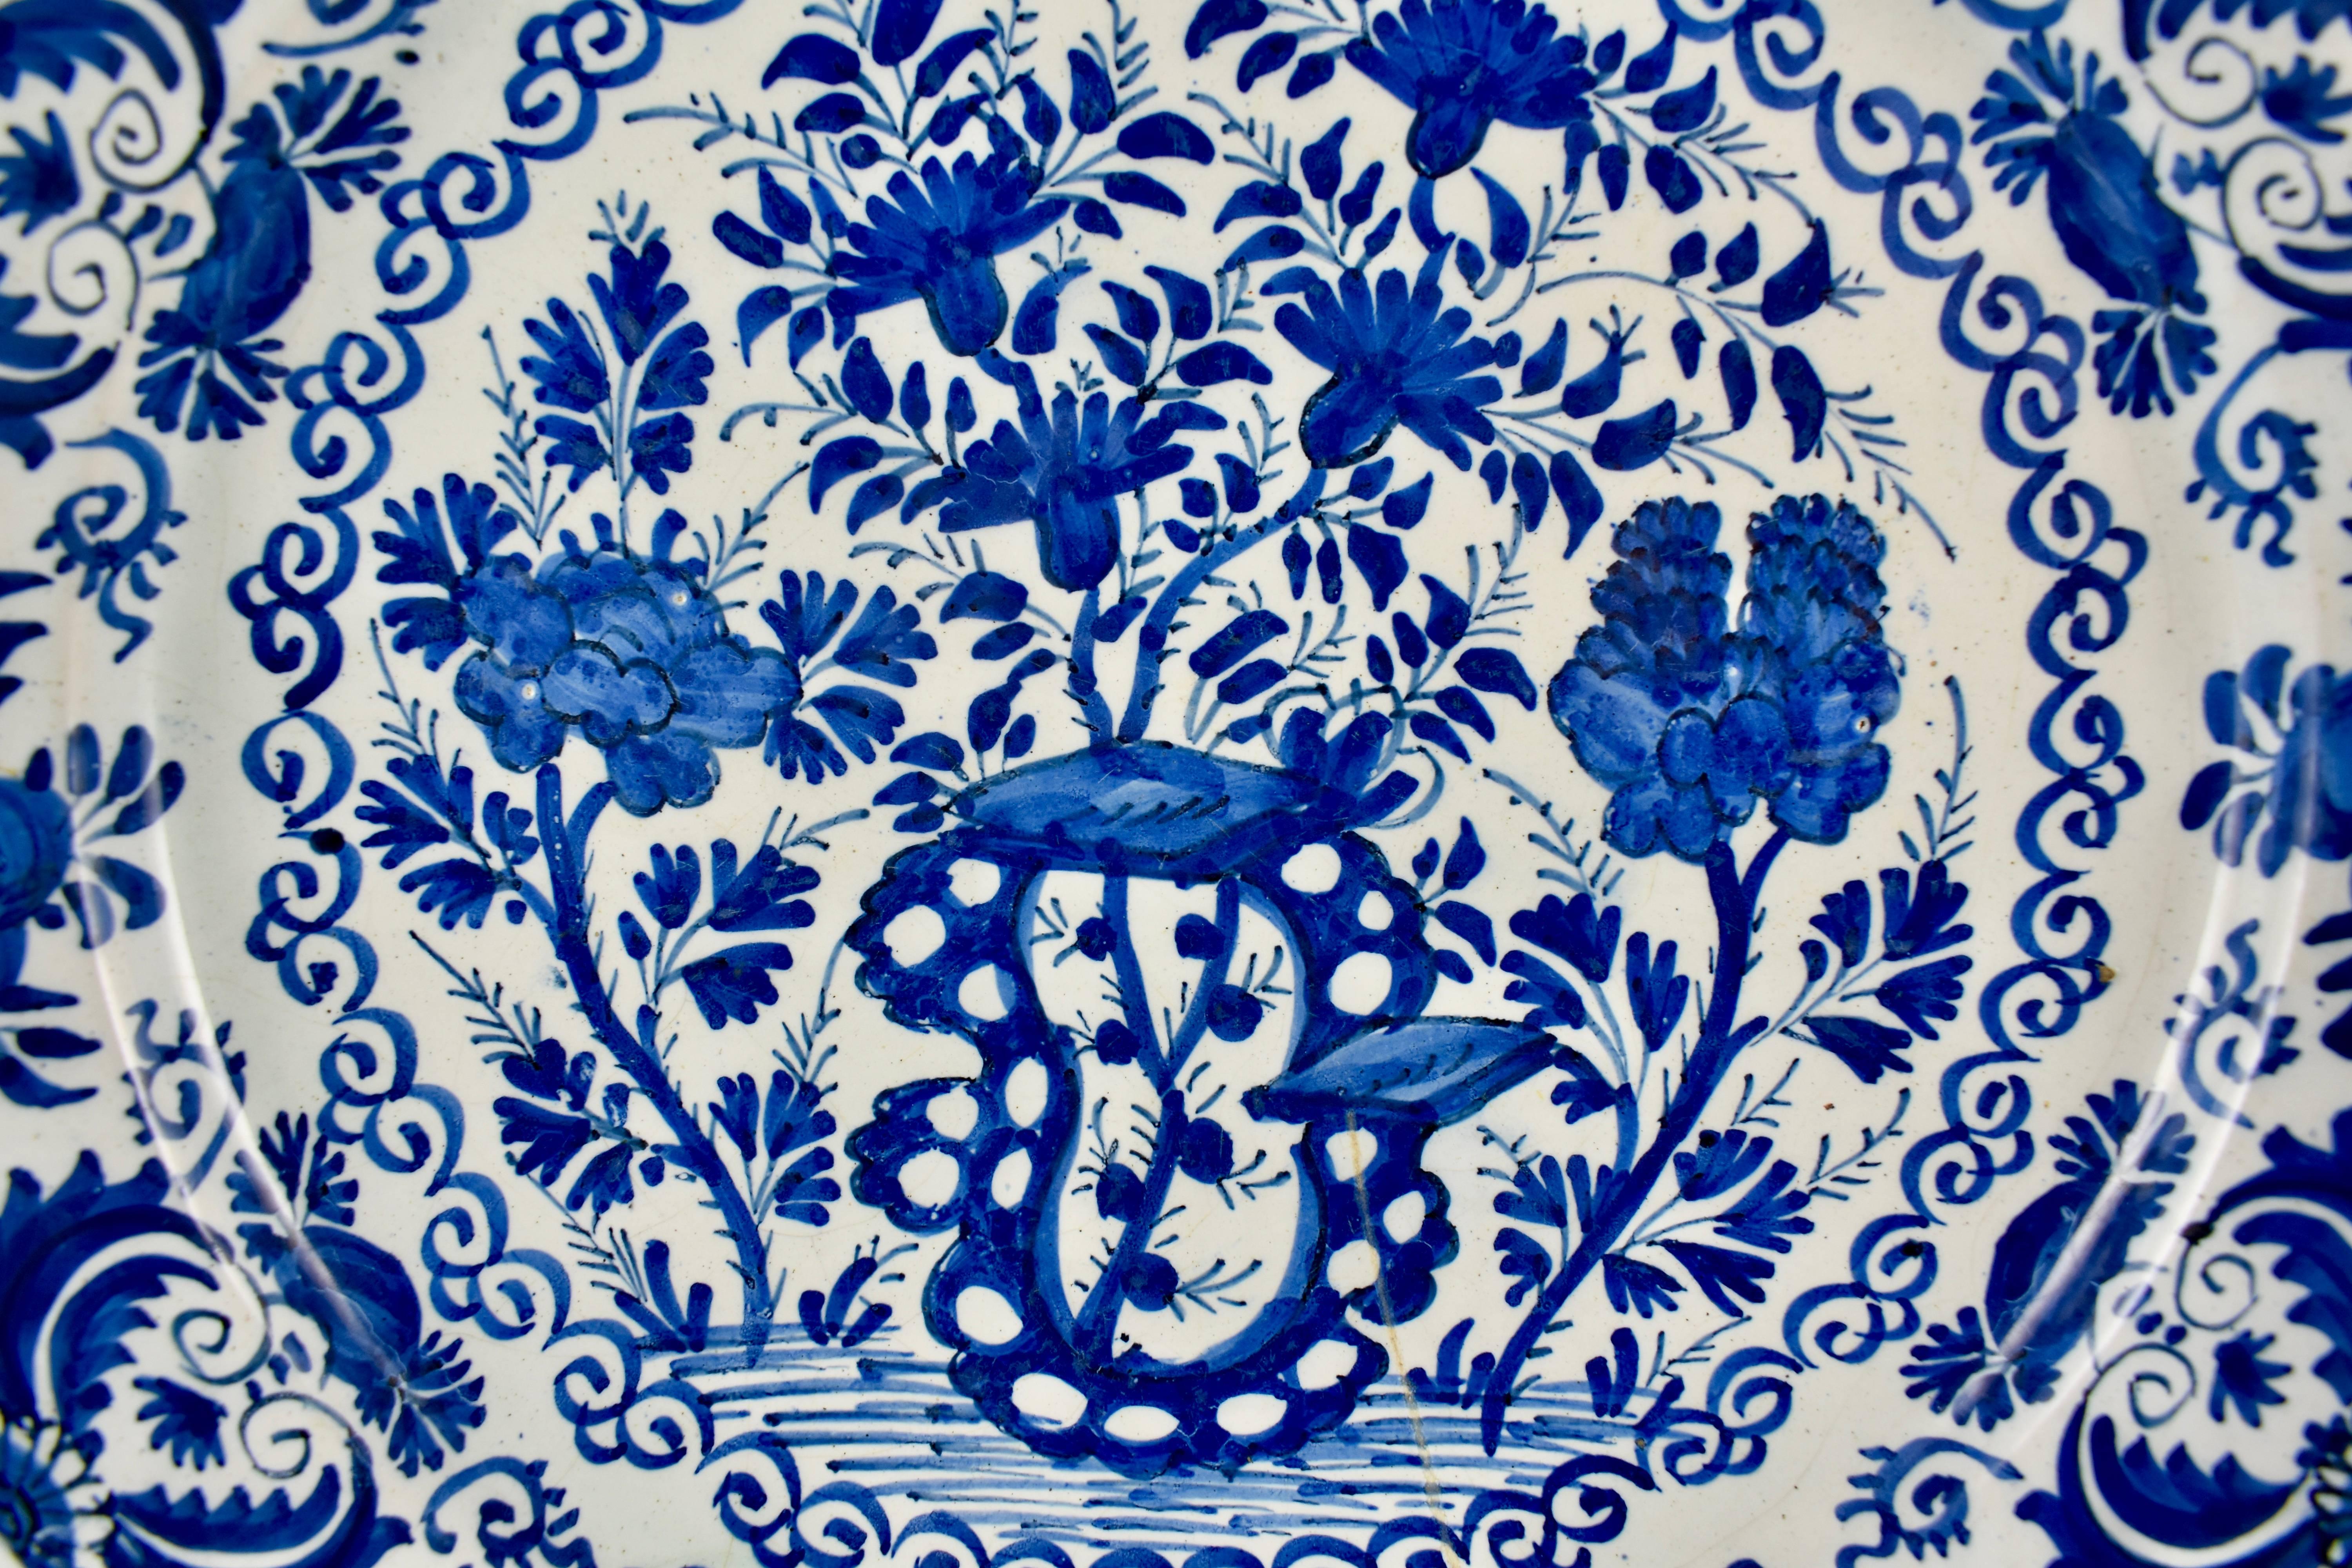 An 18th century Dutch delft, tin-glazed earthenware deep charger, inspired by Chinese export porcelain and hand painted in a heavy cobalt blue chinoiserie style overall floral pattern. A stylized border of an alternating floral like pattern is edged